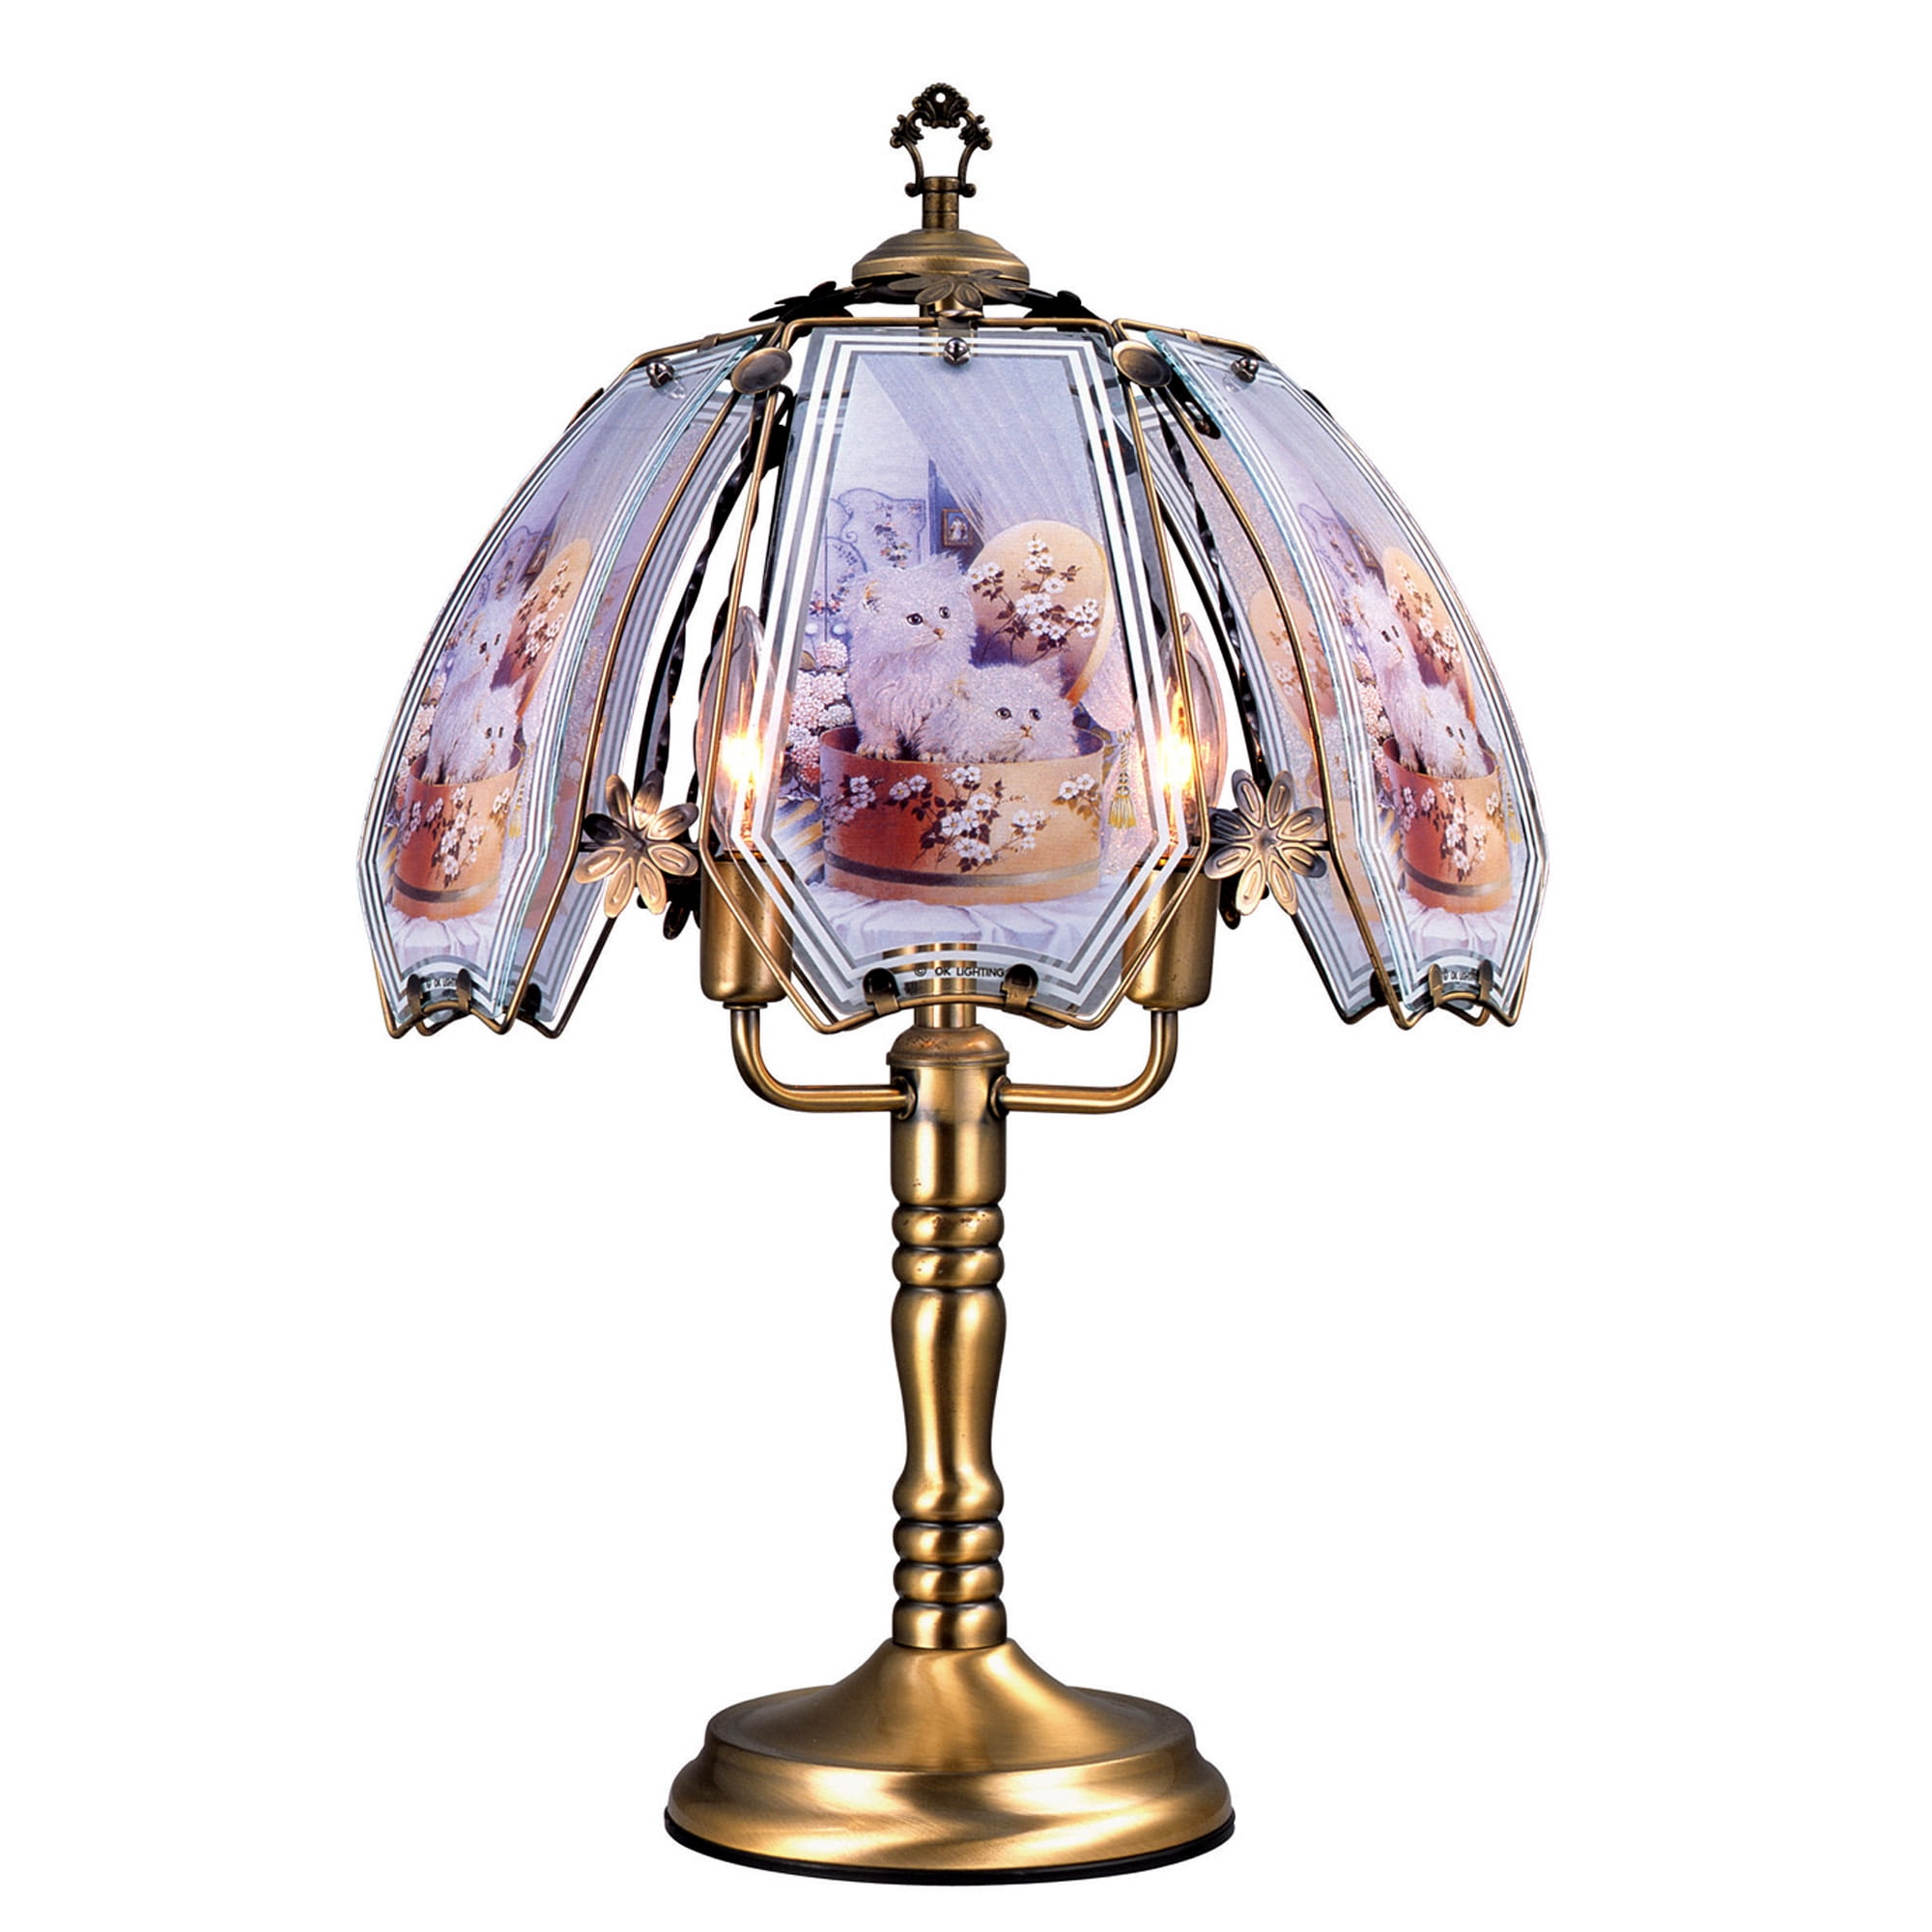 23.5" Tall Metal Touch Table Lamp, Brushed Gold finish, Cats-Patterned